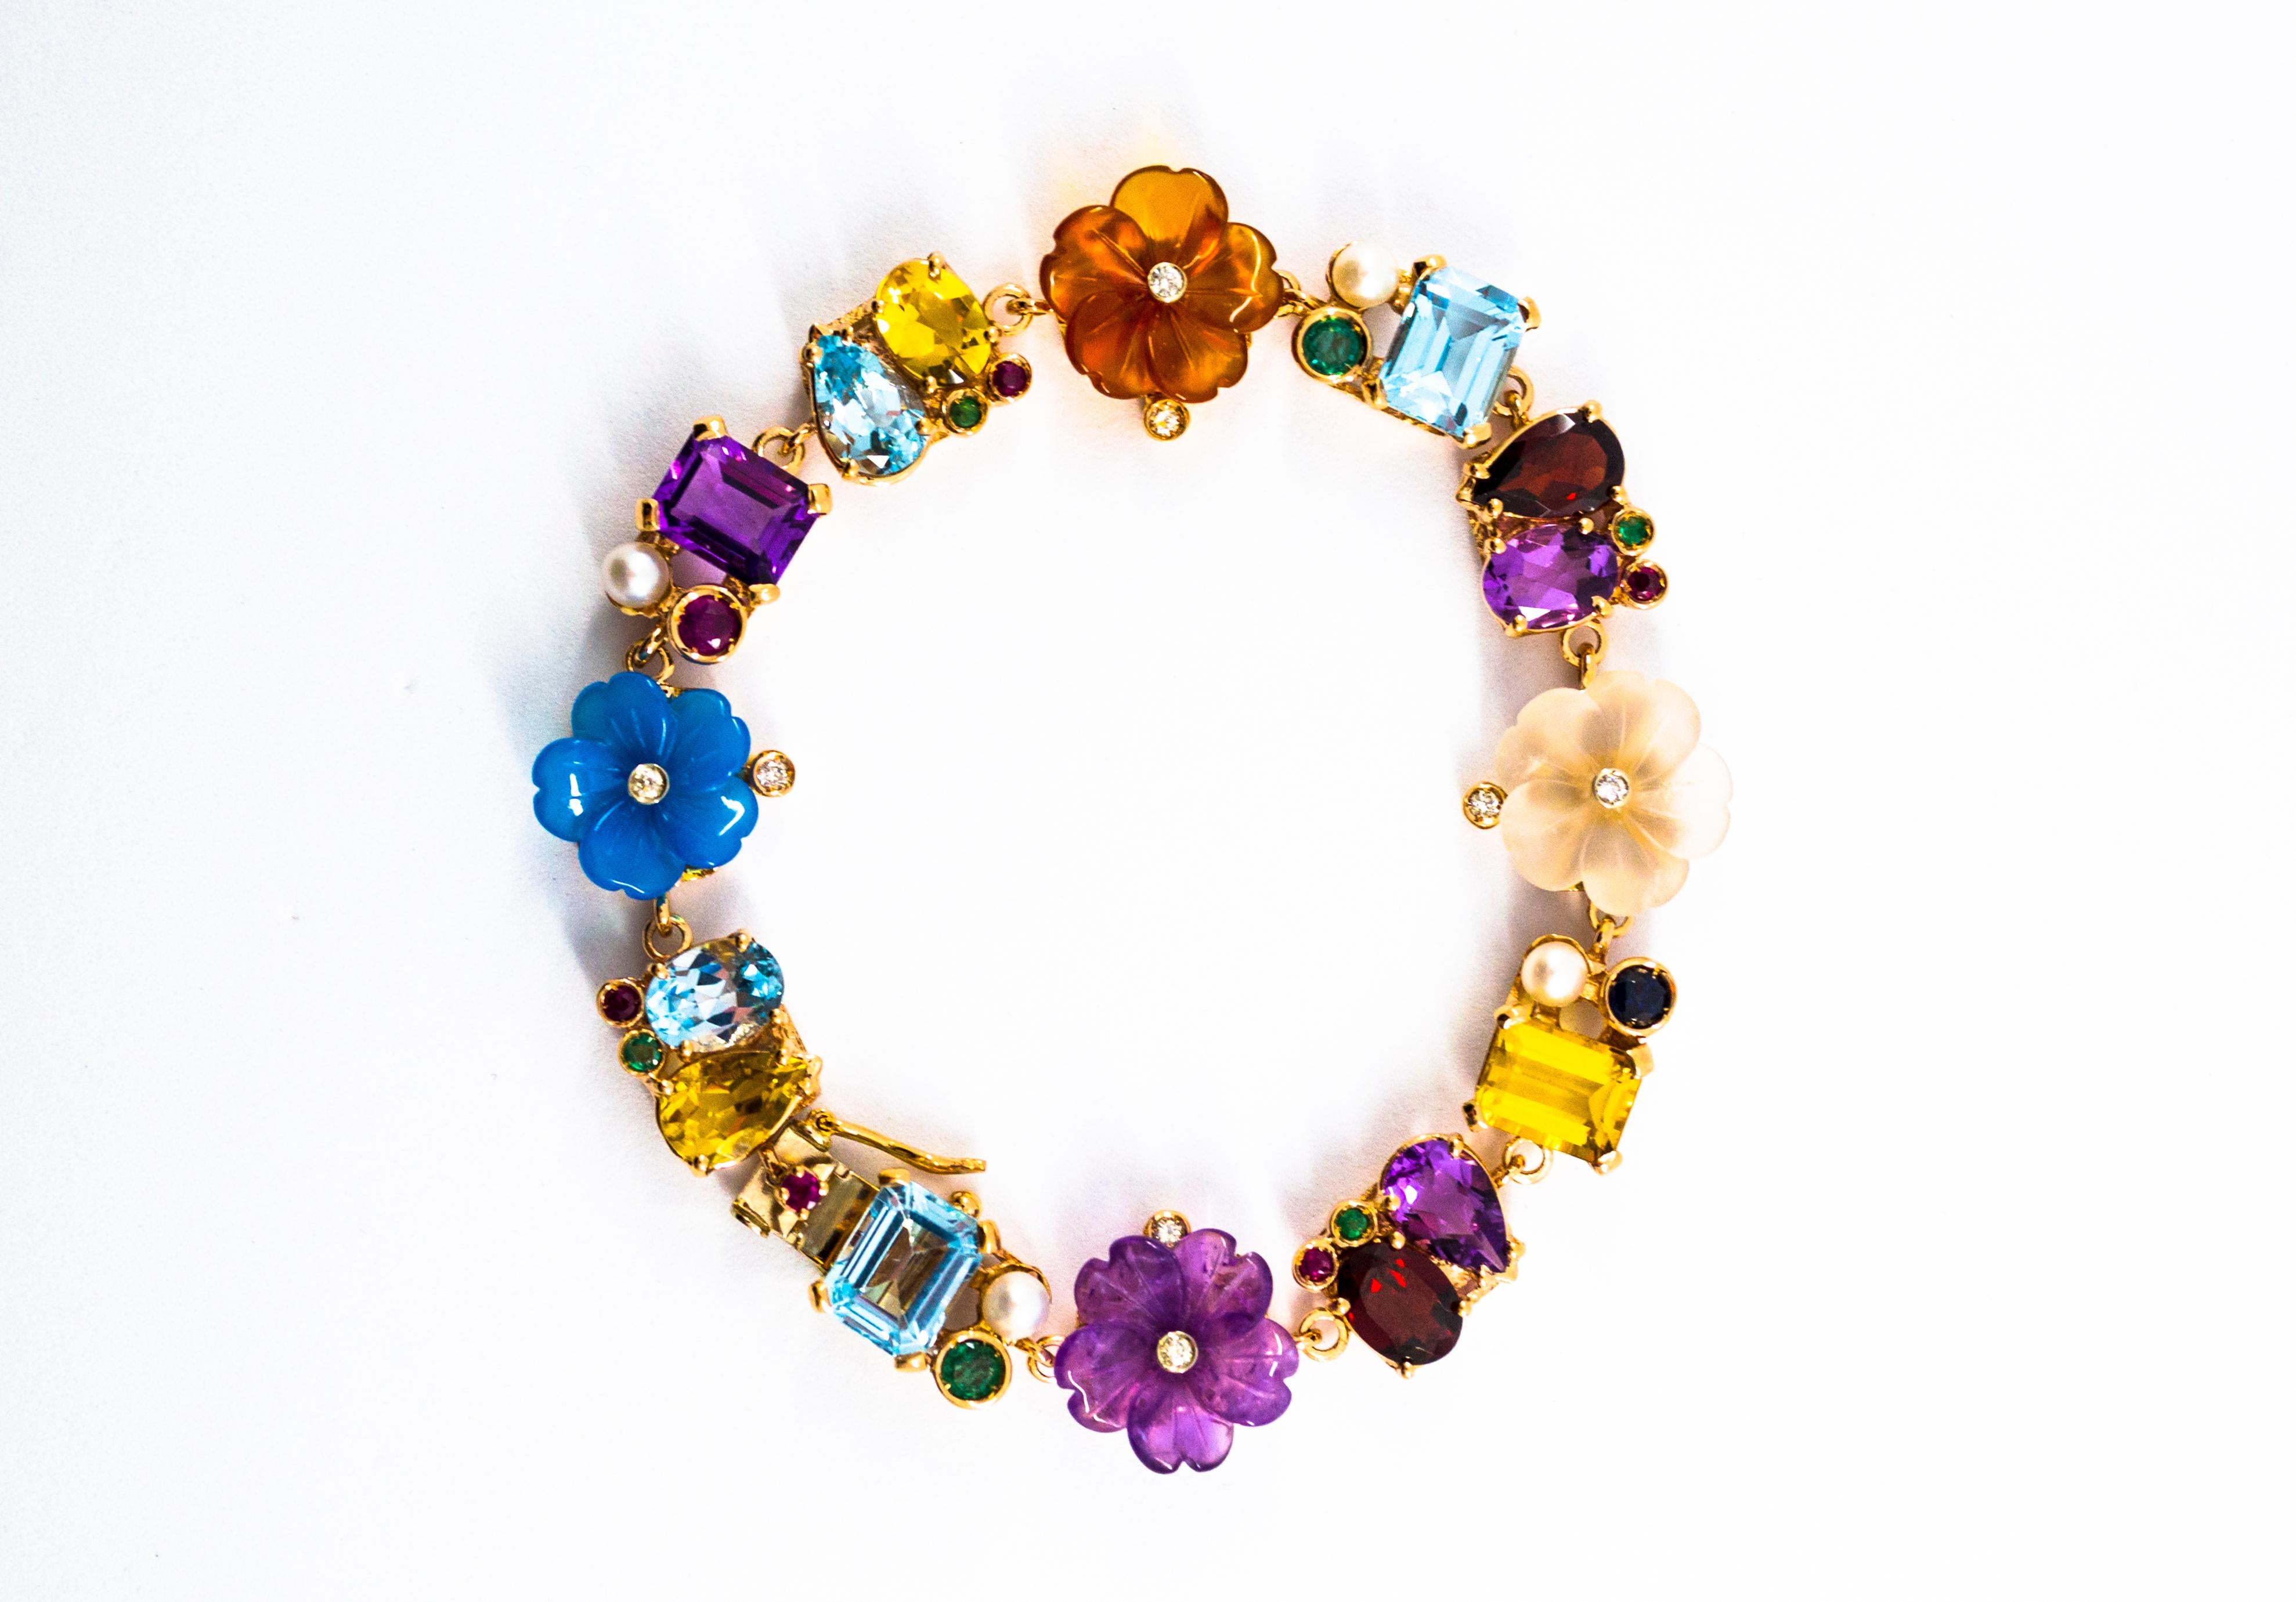 This Bracelet is made of 14K Yellow Gold but we can make it also in 9 or 18K Yellow Gold.
This Bracelet has 0.20 Carats of White Diamonds.
This Bracelet has 0.90 Carats of Blue Sapphires, Rubies and Emeralds.
This Bracelet has also Topaz, Amethyst,